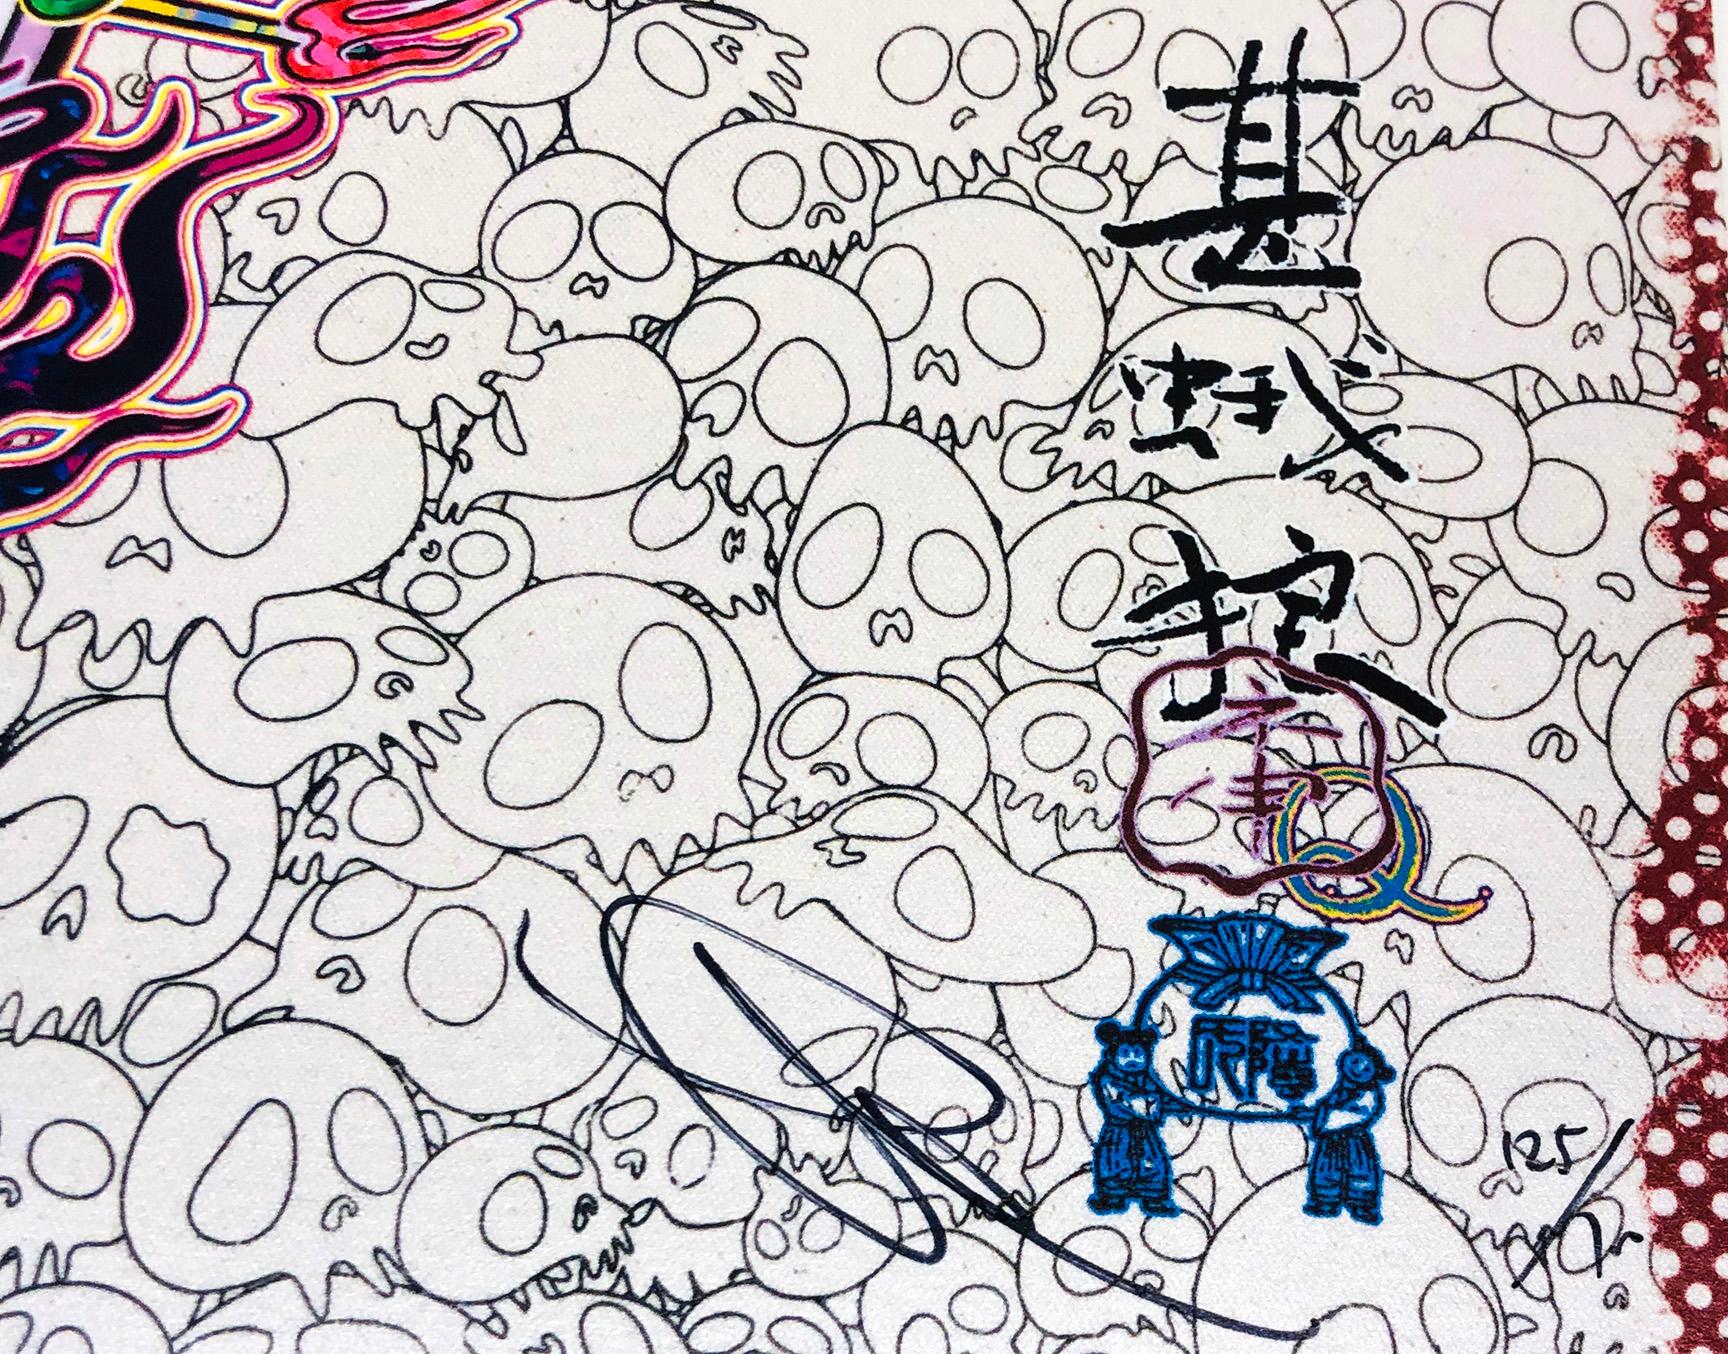 Takashi Murakami 'Obliterate The Self and Even a Fire is Cool', 2013; hand-signed and numbered from an edition of 300:

Medium: Offset lithograph in colors with silver on smooth wove paper.
Dimensions: 19.7 x 19.7 inches (50 x 50 cm). 
Stored flat.